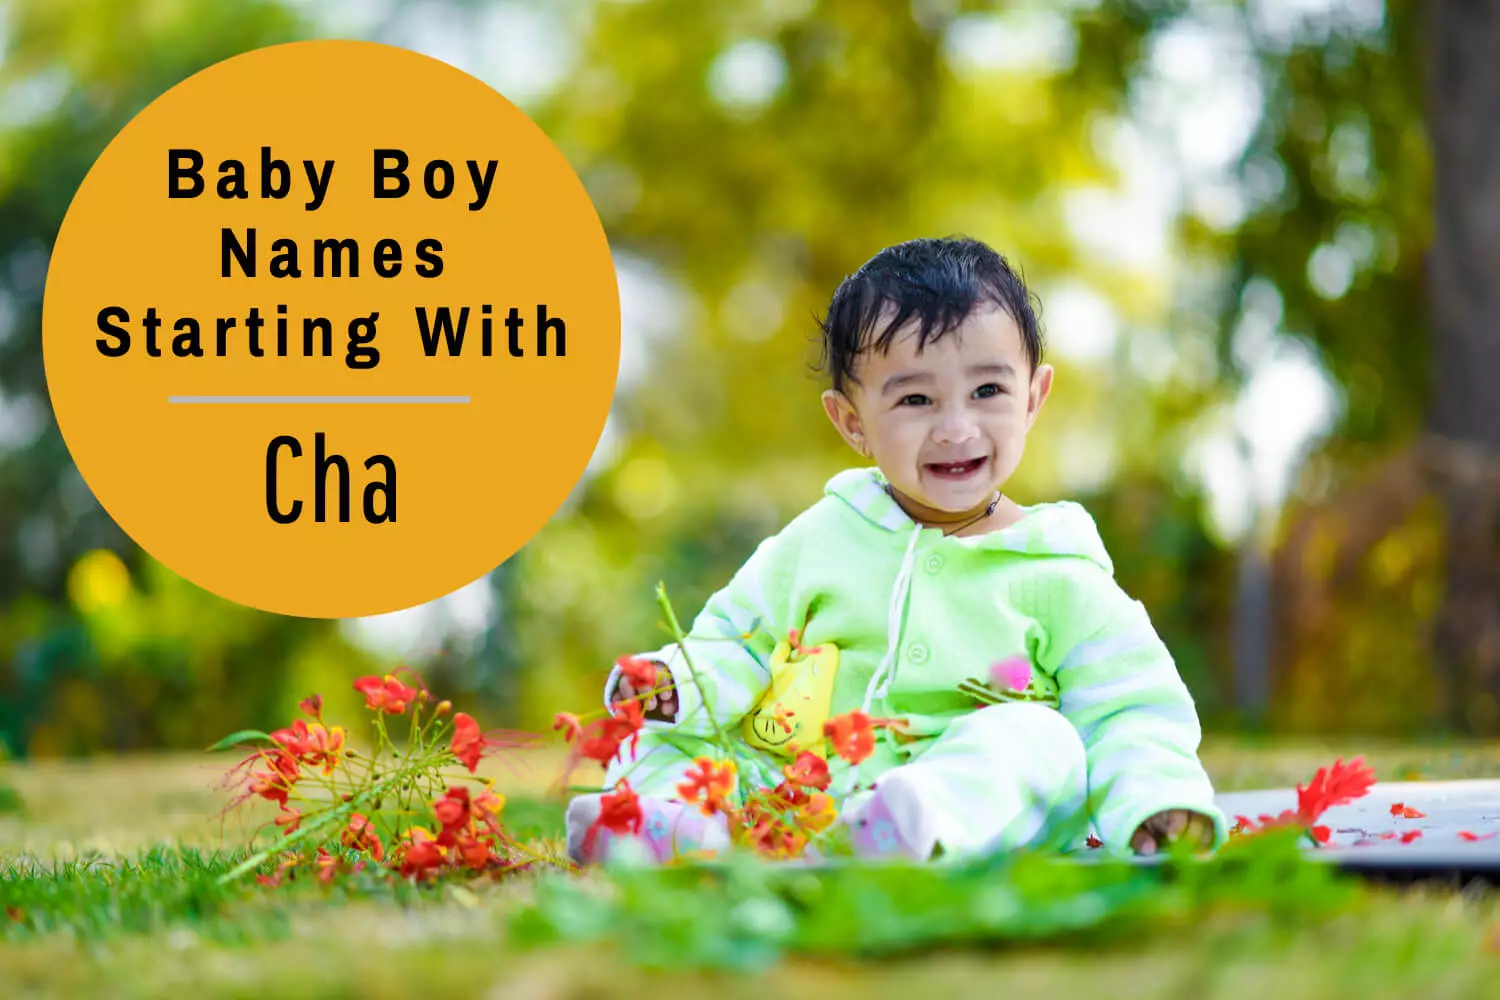 Baby Boy Names Starting With Cha